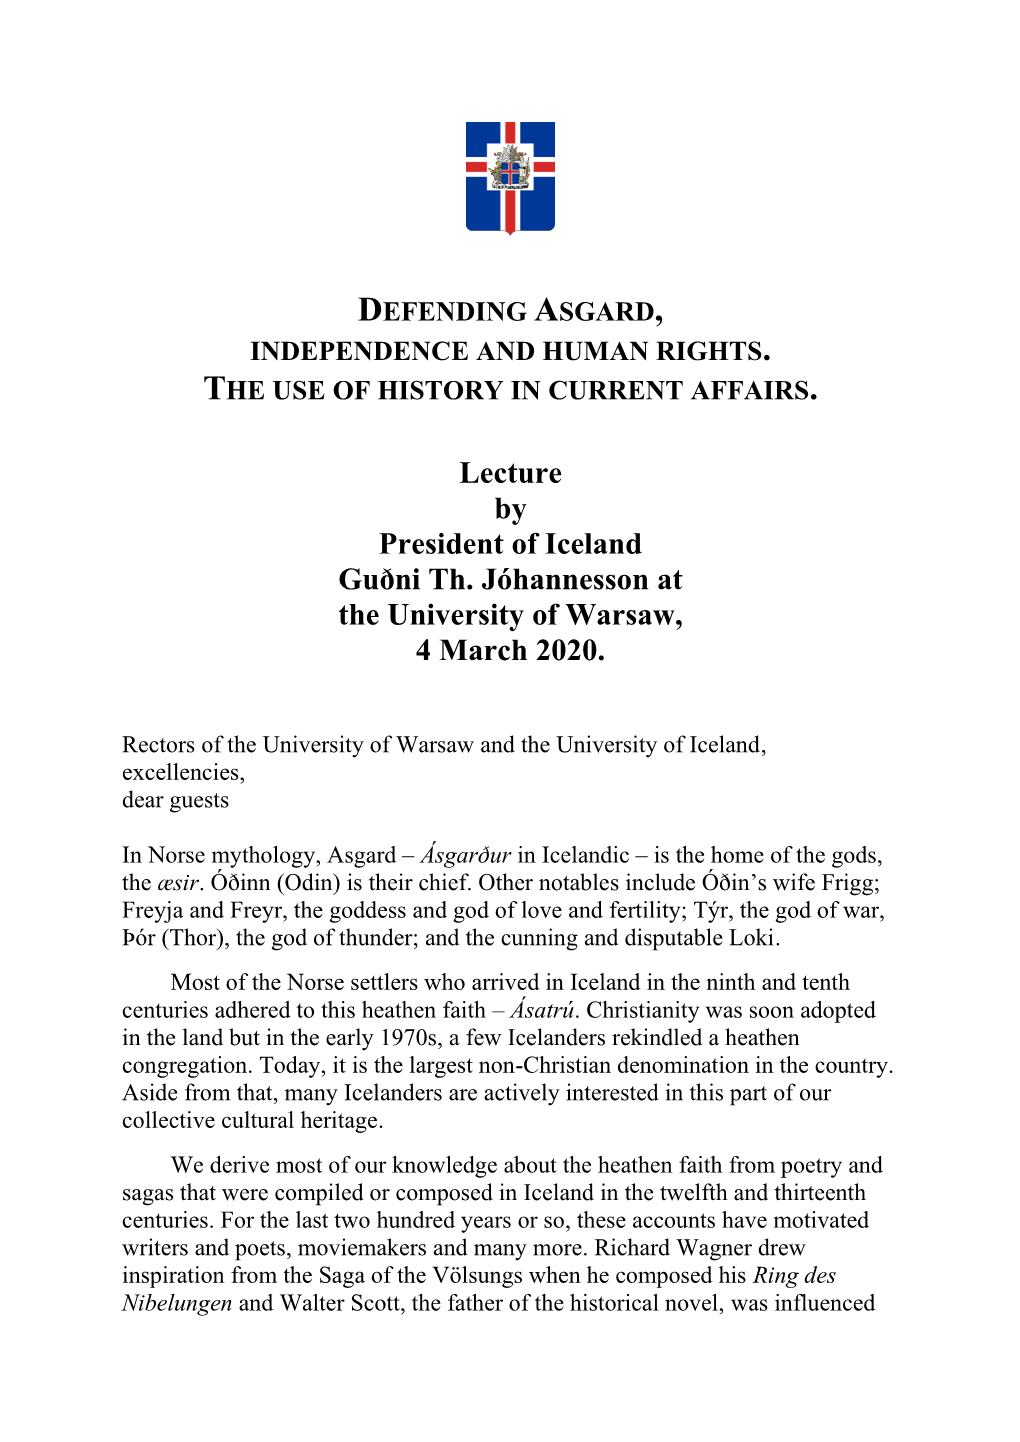 Lecture by President of Iceland Guðni Th. Jóhannesson at the University of Warsaw, 4 March 2020